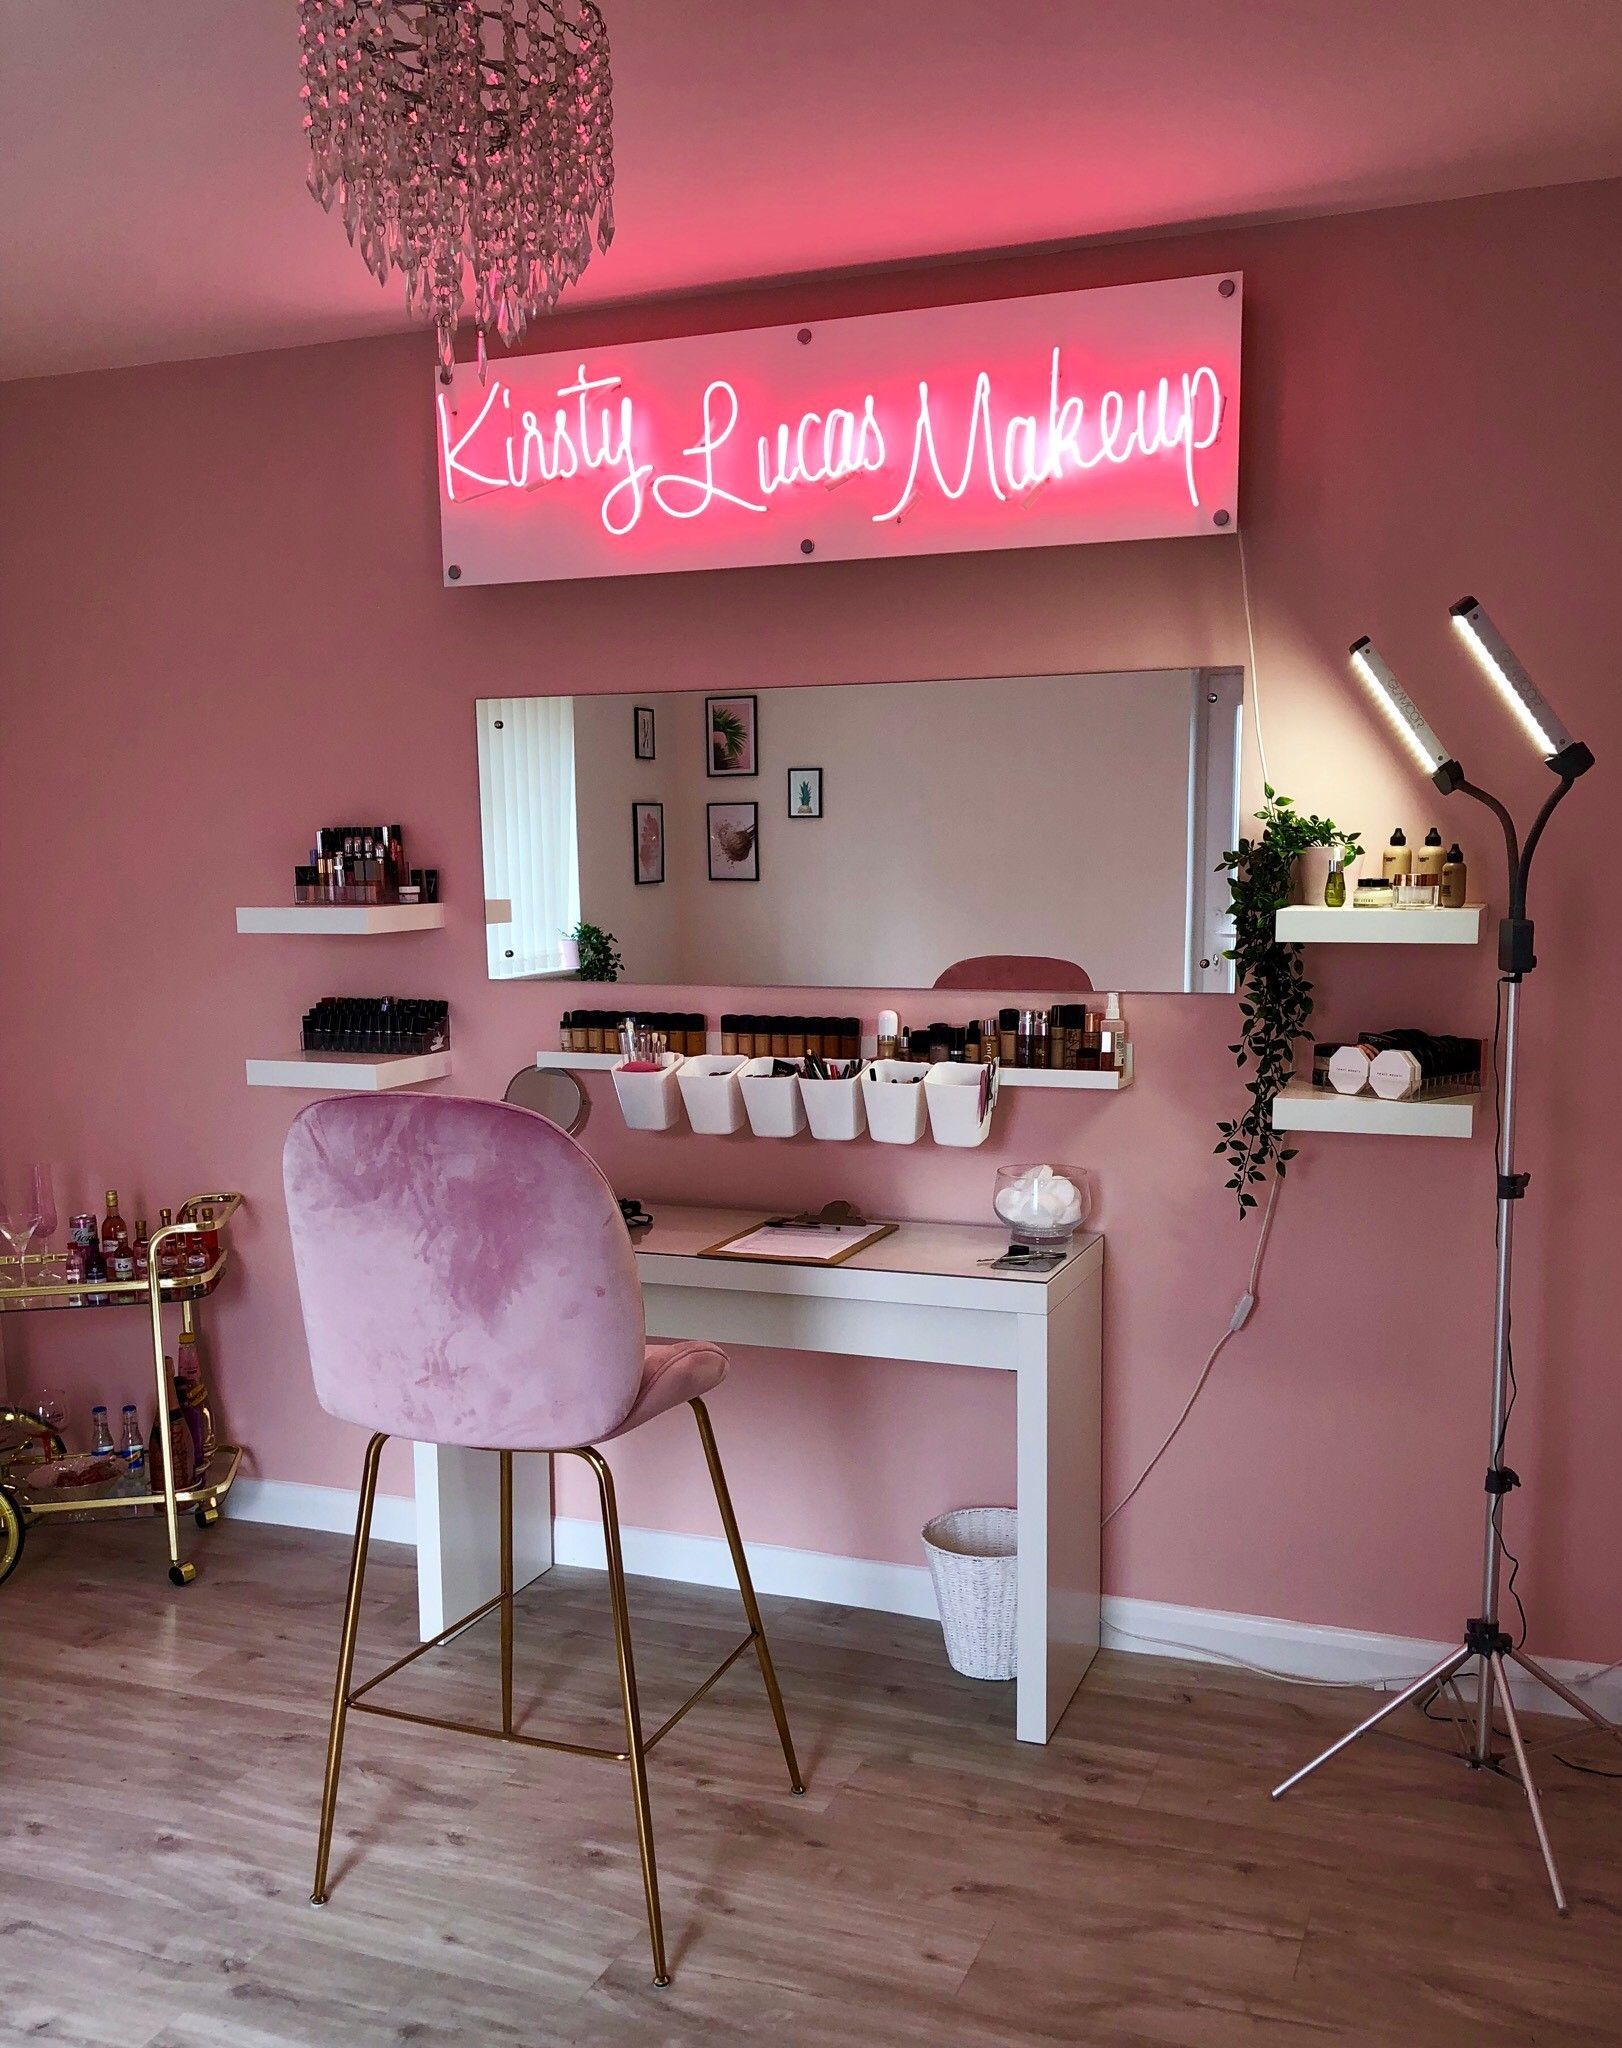 Neon Signs for Salons - Neon Creations Ltd - Neon Signs for Salons - Neon Creations Ltd -   15 beauty Salon lighting ideas